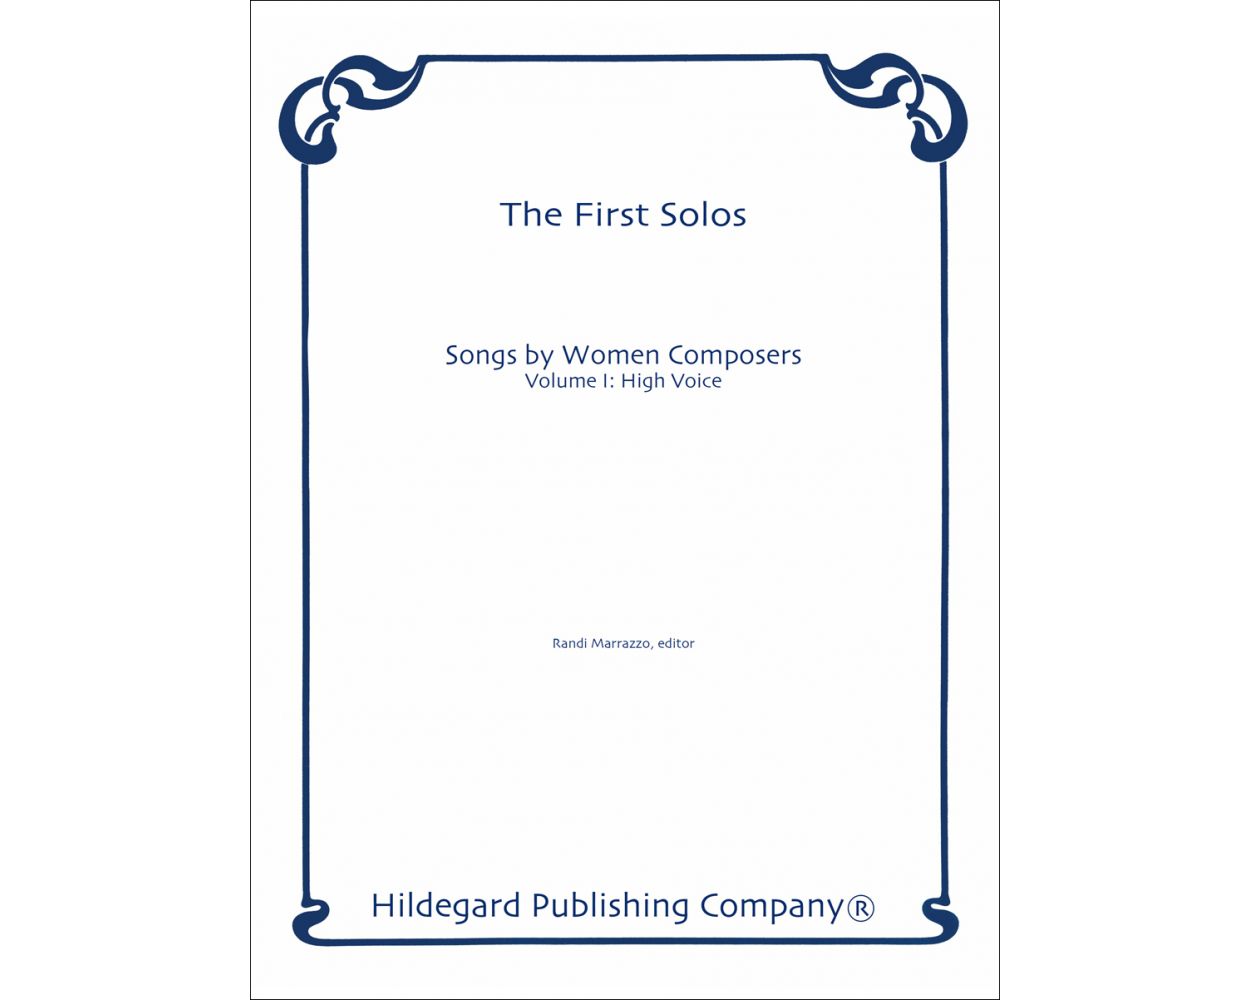 First Solos: Songs by Women Composers Vol.1, High Voice